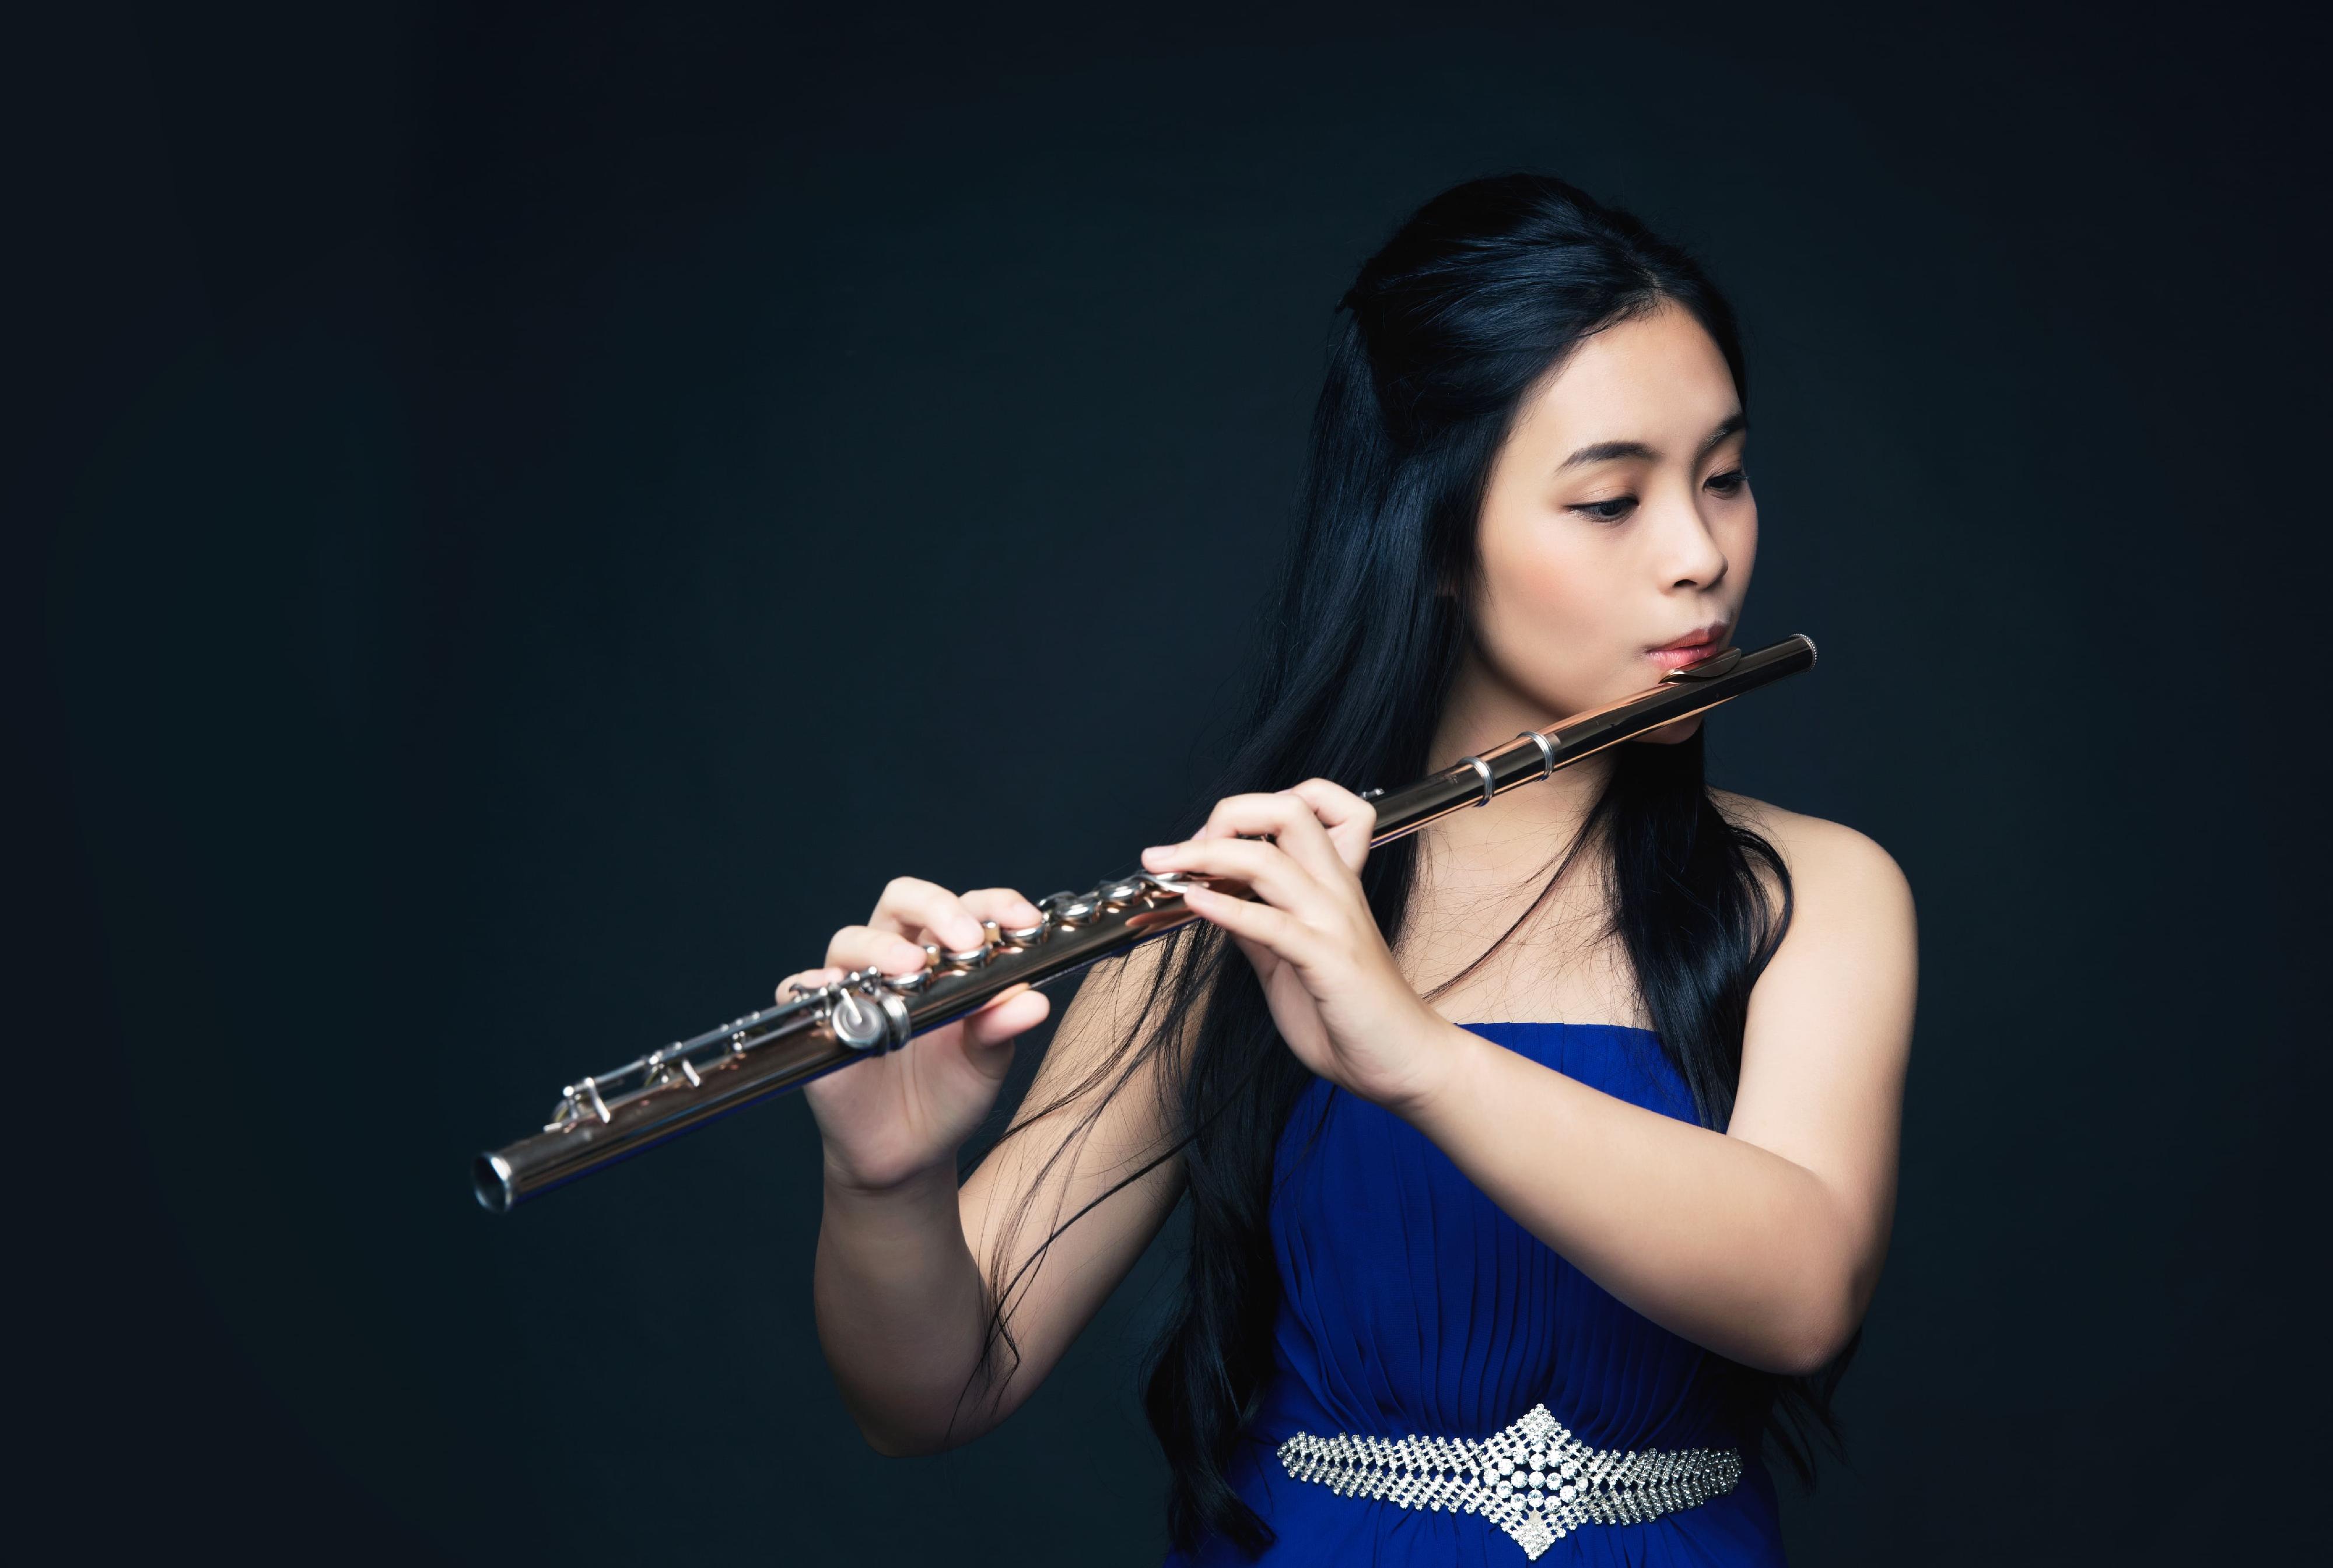 The Leisure and Cultural Services Department's "Hong Kong Artists" Series will present the Duo Recital by Alice Hui (Flute) and Tommy Liu (Bassoon) in May. Photo shows flautist Hui.